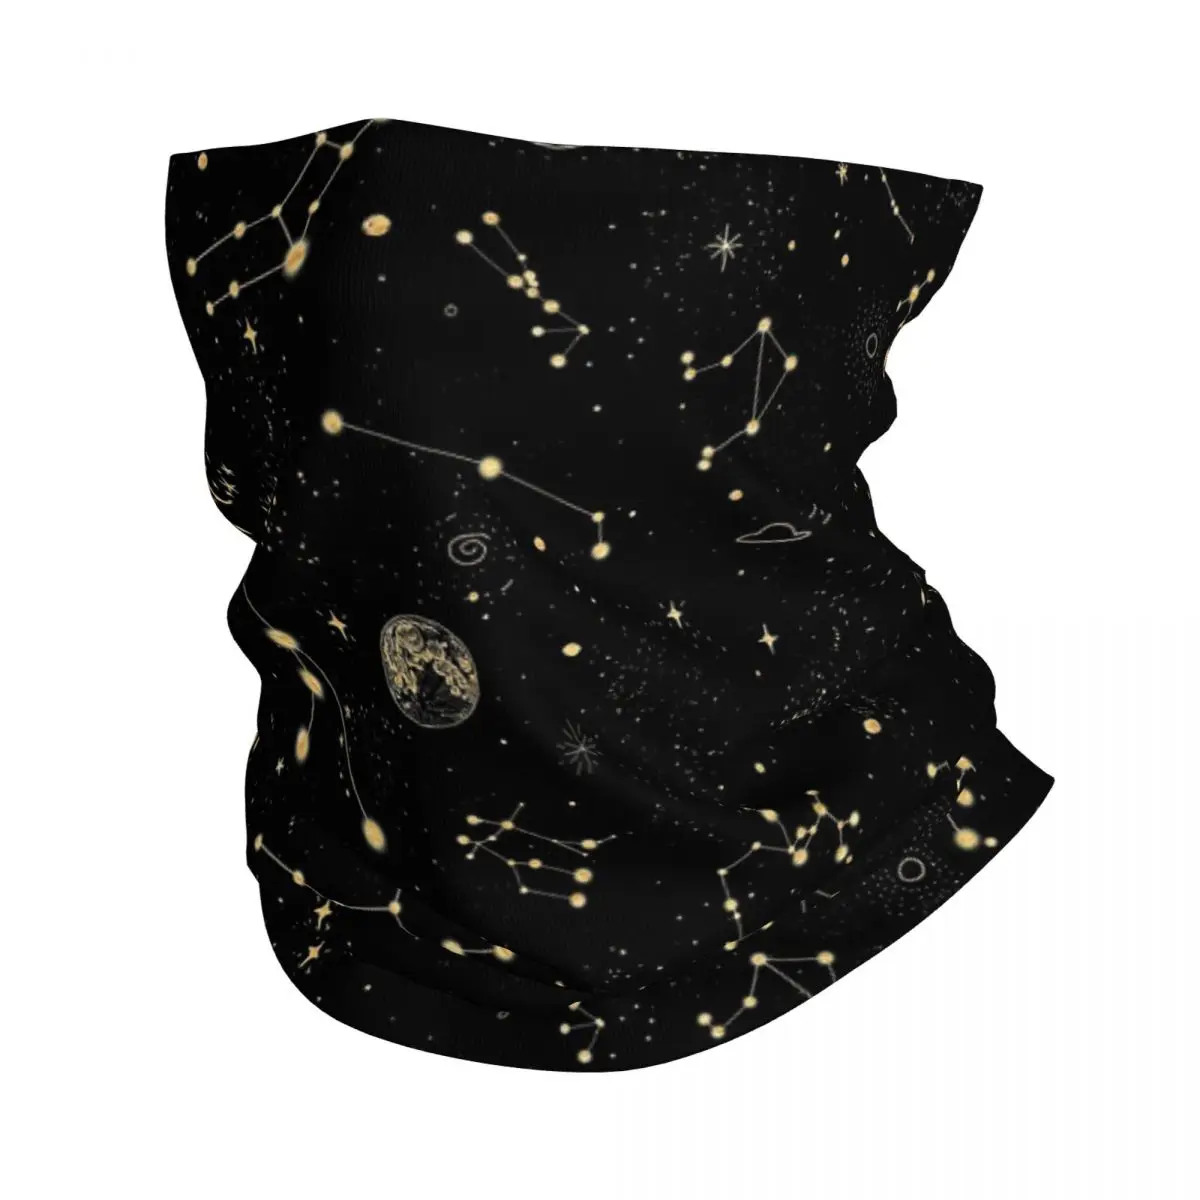 

Into The Galaxy Bandana Neck Cover Printed Occult Witch Magic Constellation Mask Scarf Multi-use Headwear Running Adult Washable